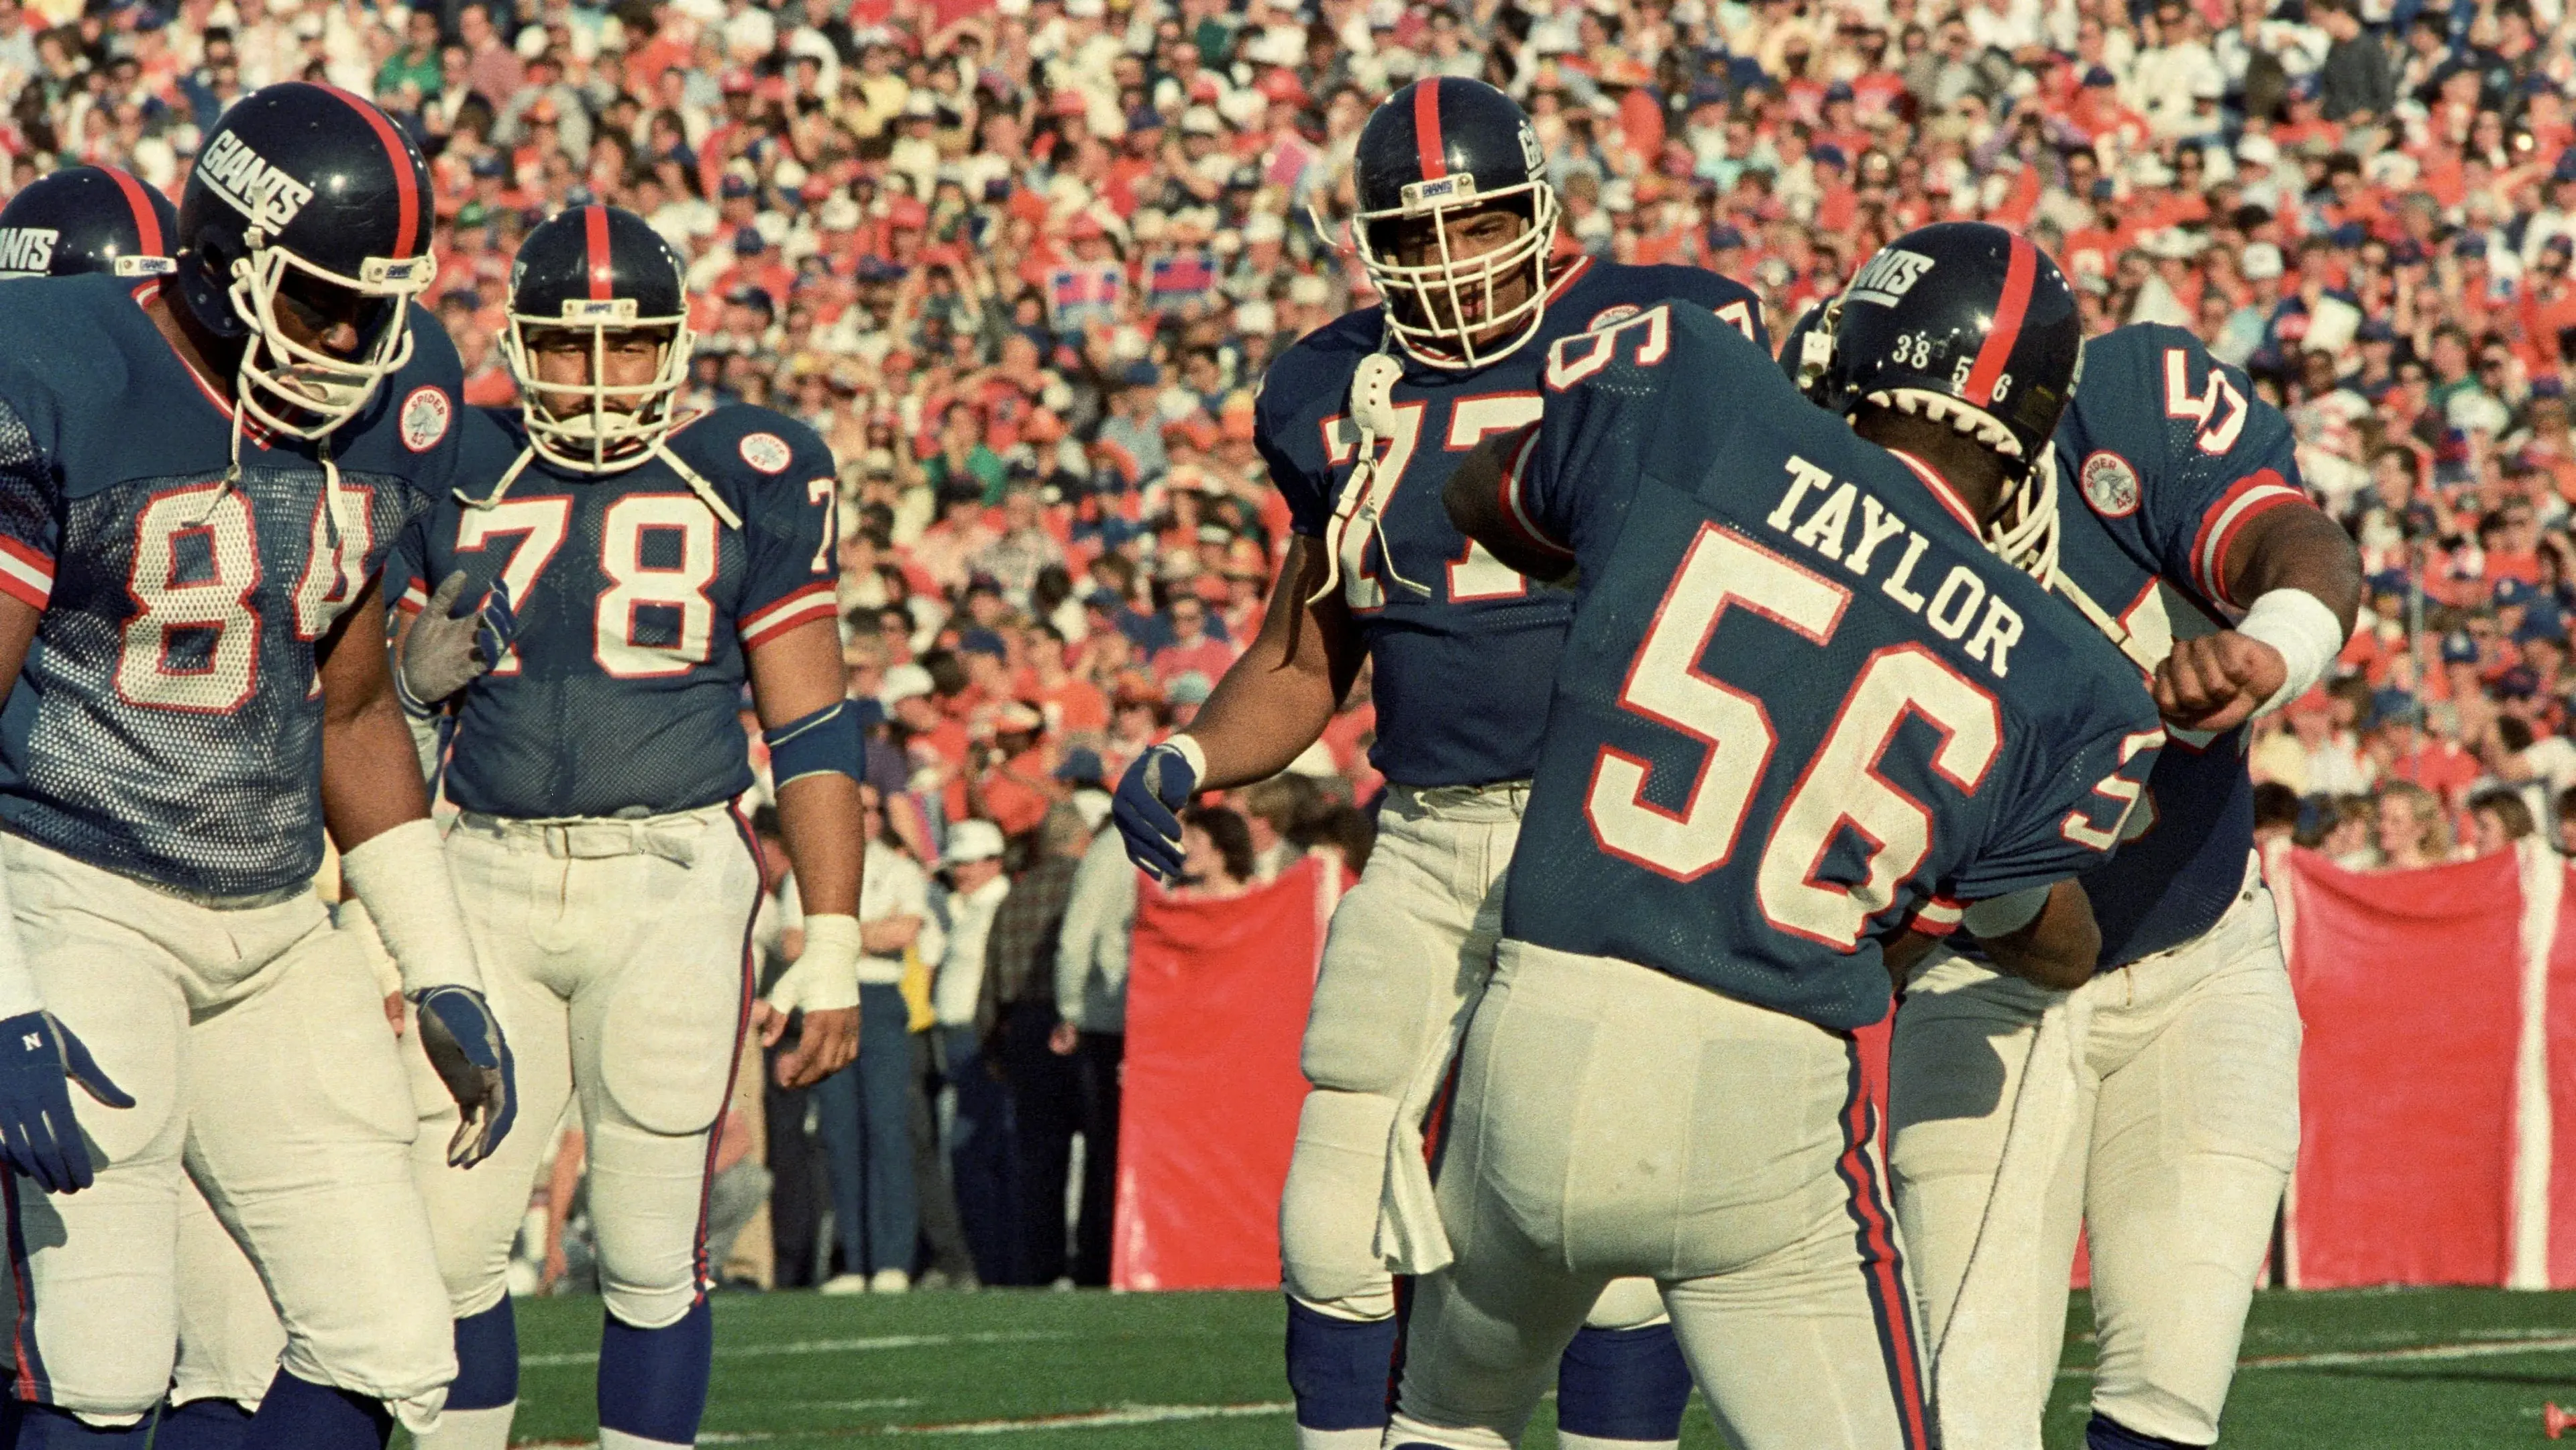 Jan 25, 1987; Pasadena, CA, USA; FILE PHOTO; New York Giants tackle Zeke Mowatt (84), nose tackle Jerome Sally (78),defensive end Eric Dorsey (77) and linebacker Lawrence Taylor (56) react on the field against the Denver Broncos during Super Bowl XXI at the Rose Bowl. The Giants defeated the Broncos 39-20. Mandatory Credit: Bob Deutsch-USA TODAY Sports / Bob Deutsch-USA TODAY Sports